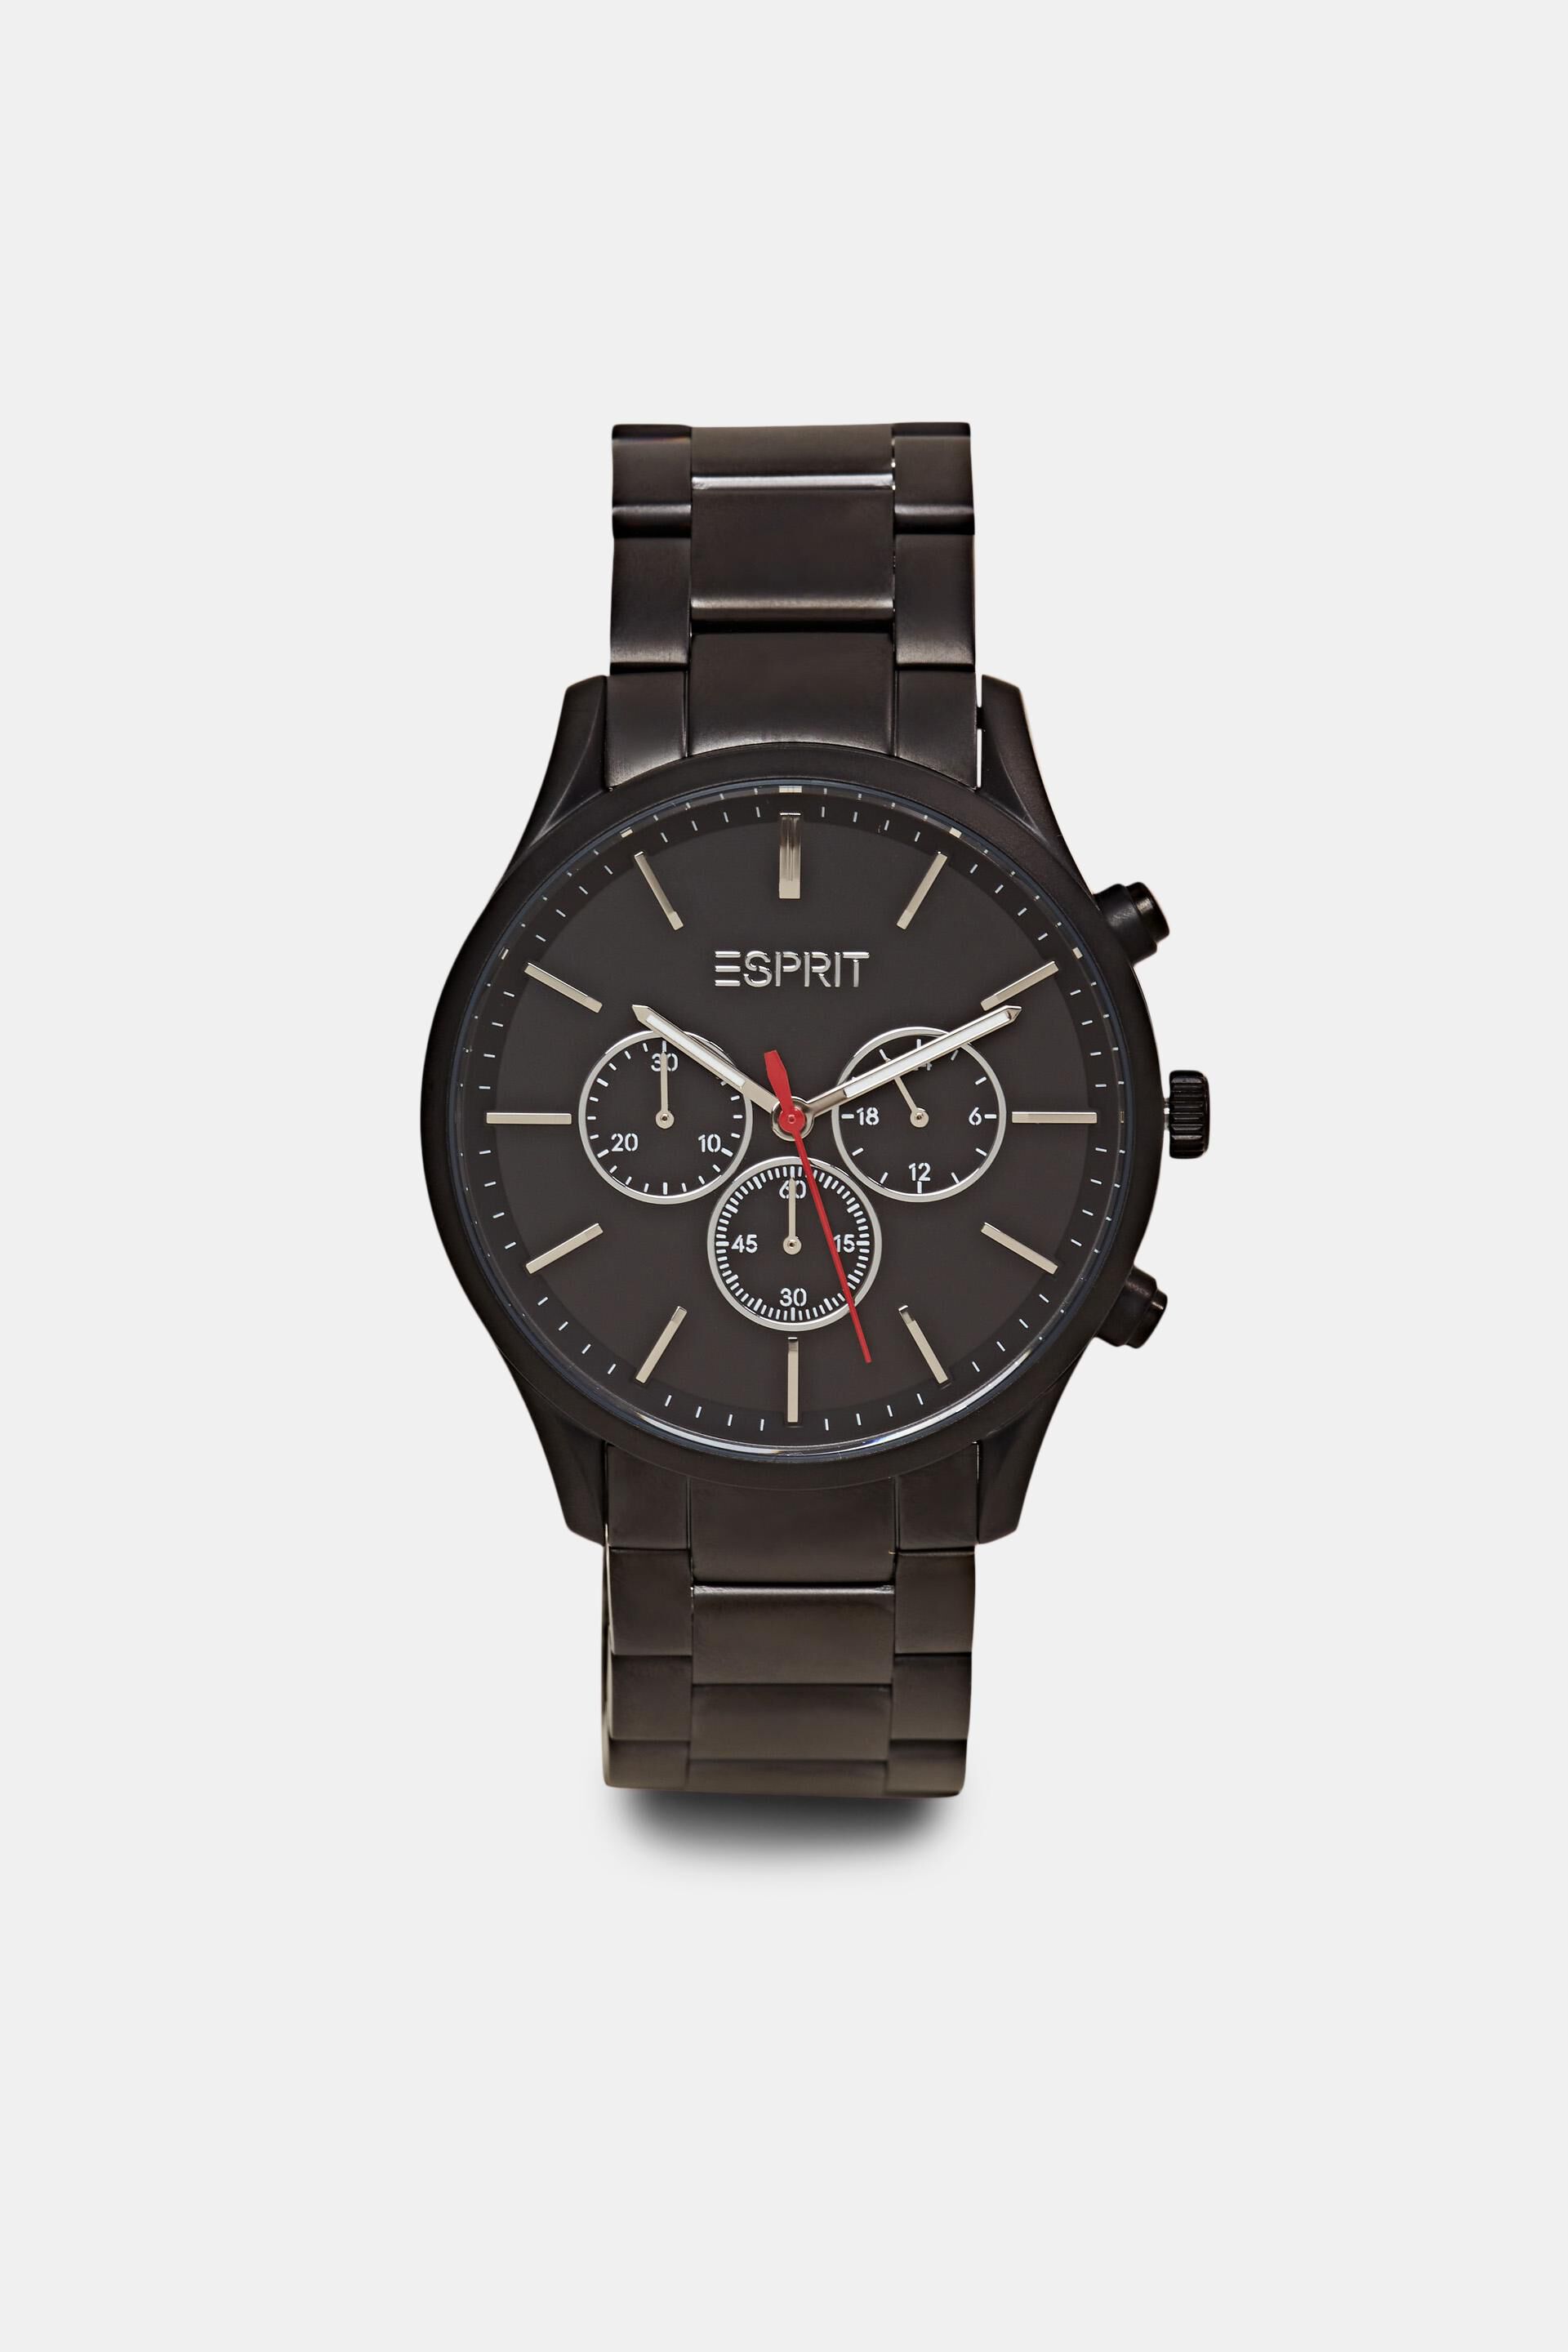 Buy Esprit Watches online • Fast shipping • Mastersintime.com